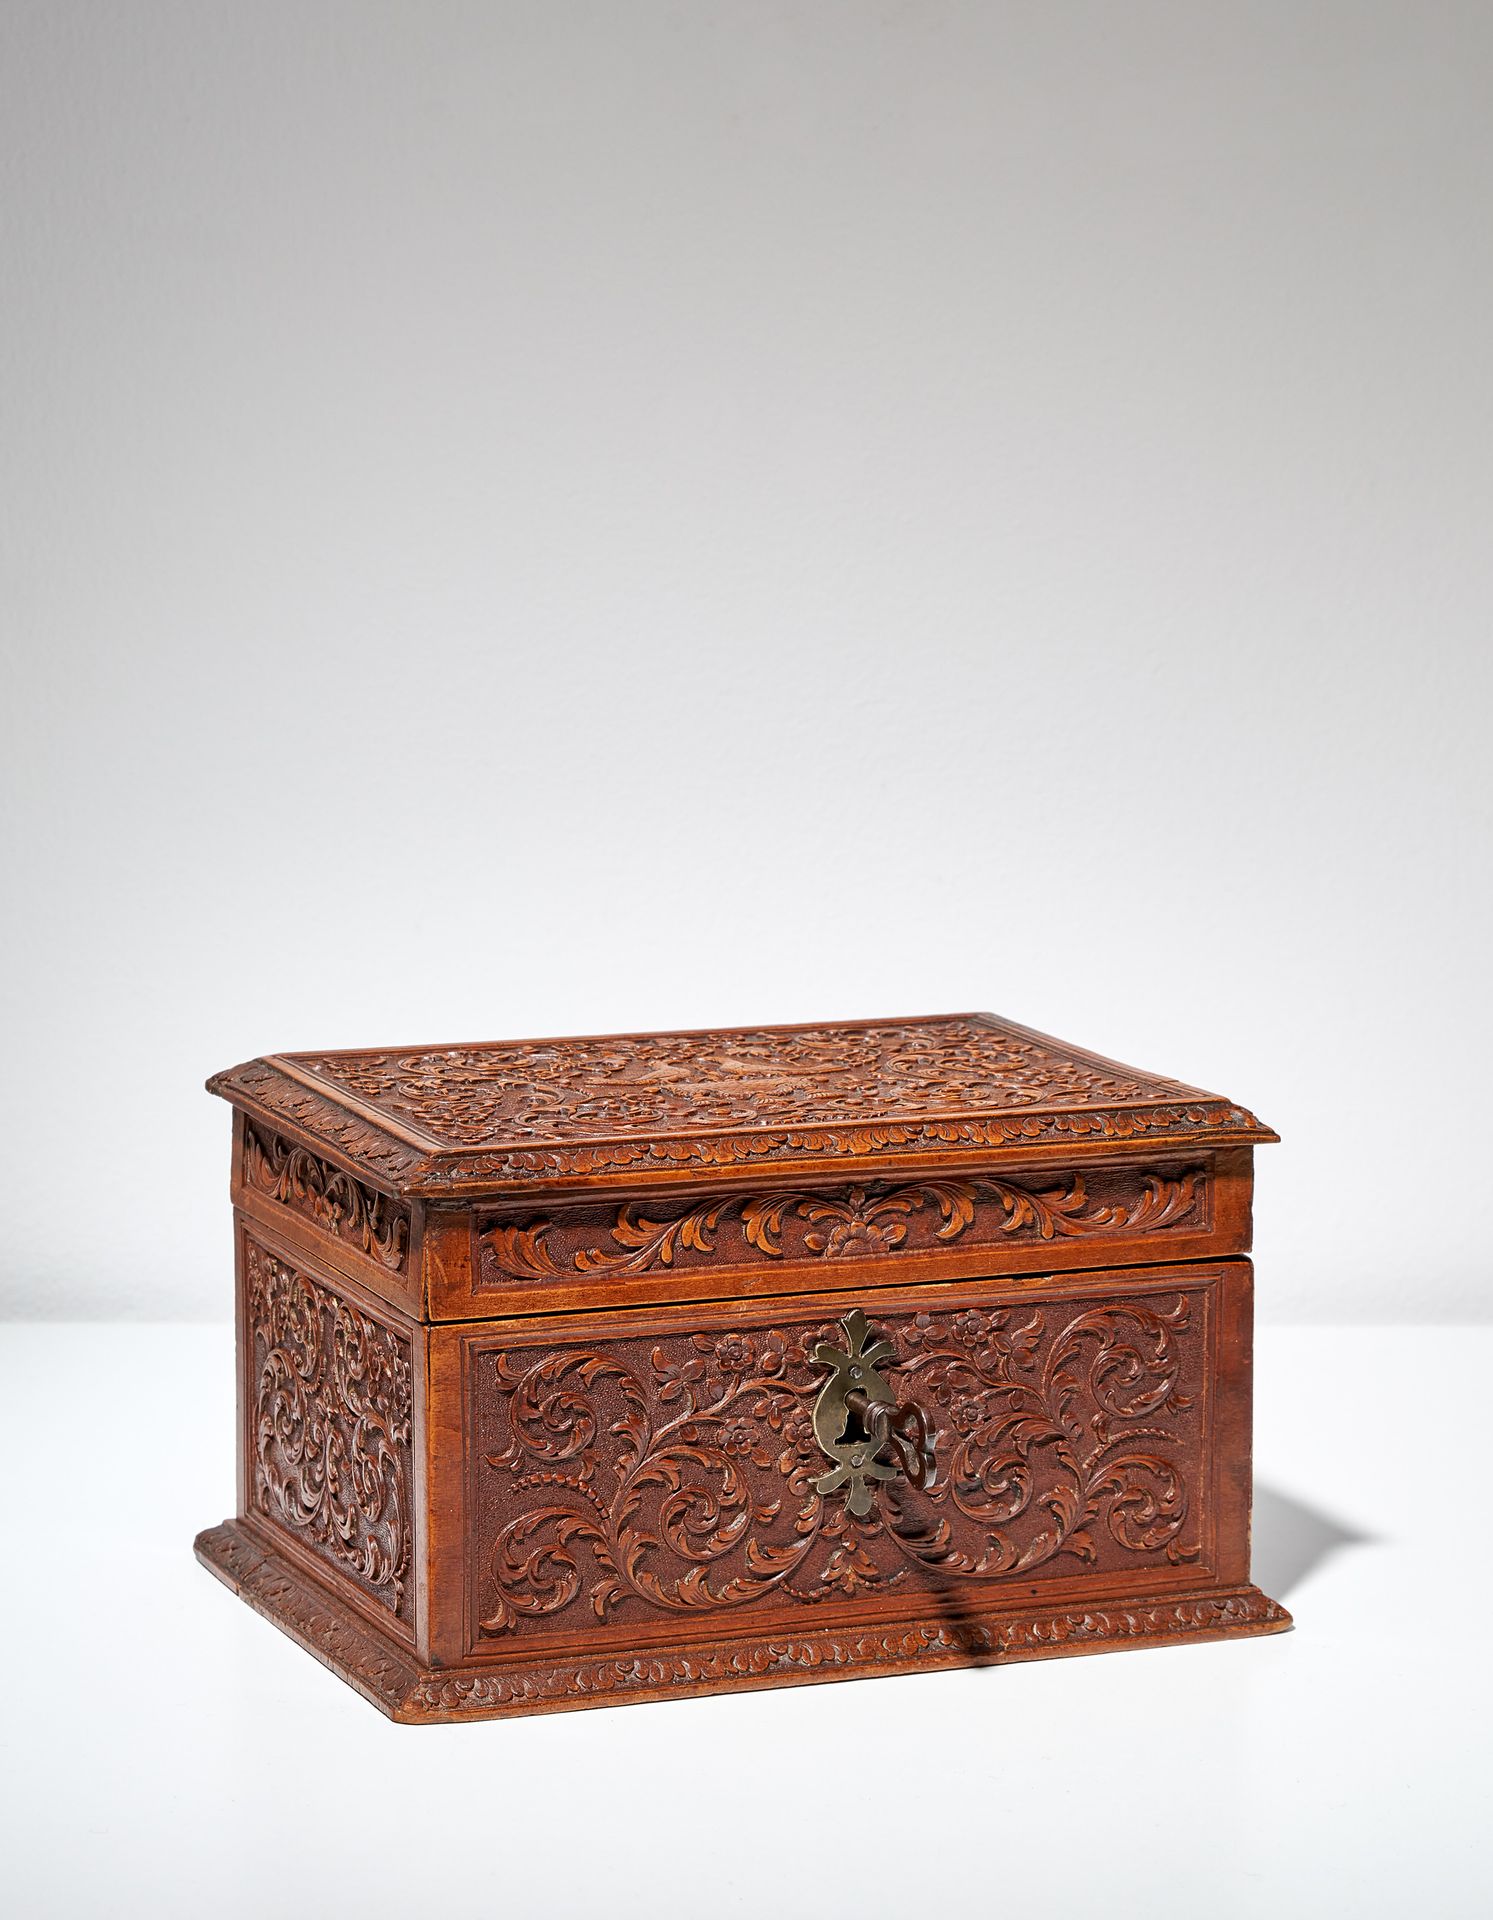 Null ST LUCIA WOOD CASKET

Nancy, Bagard workshop, 18th century

Decorated with &hellip;